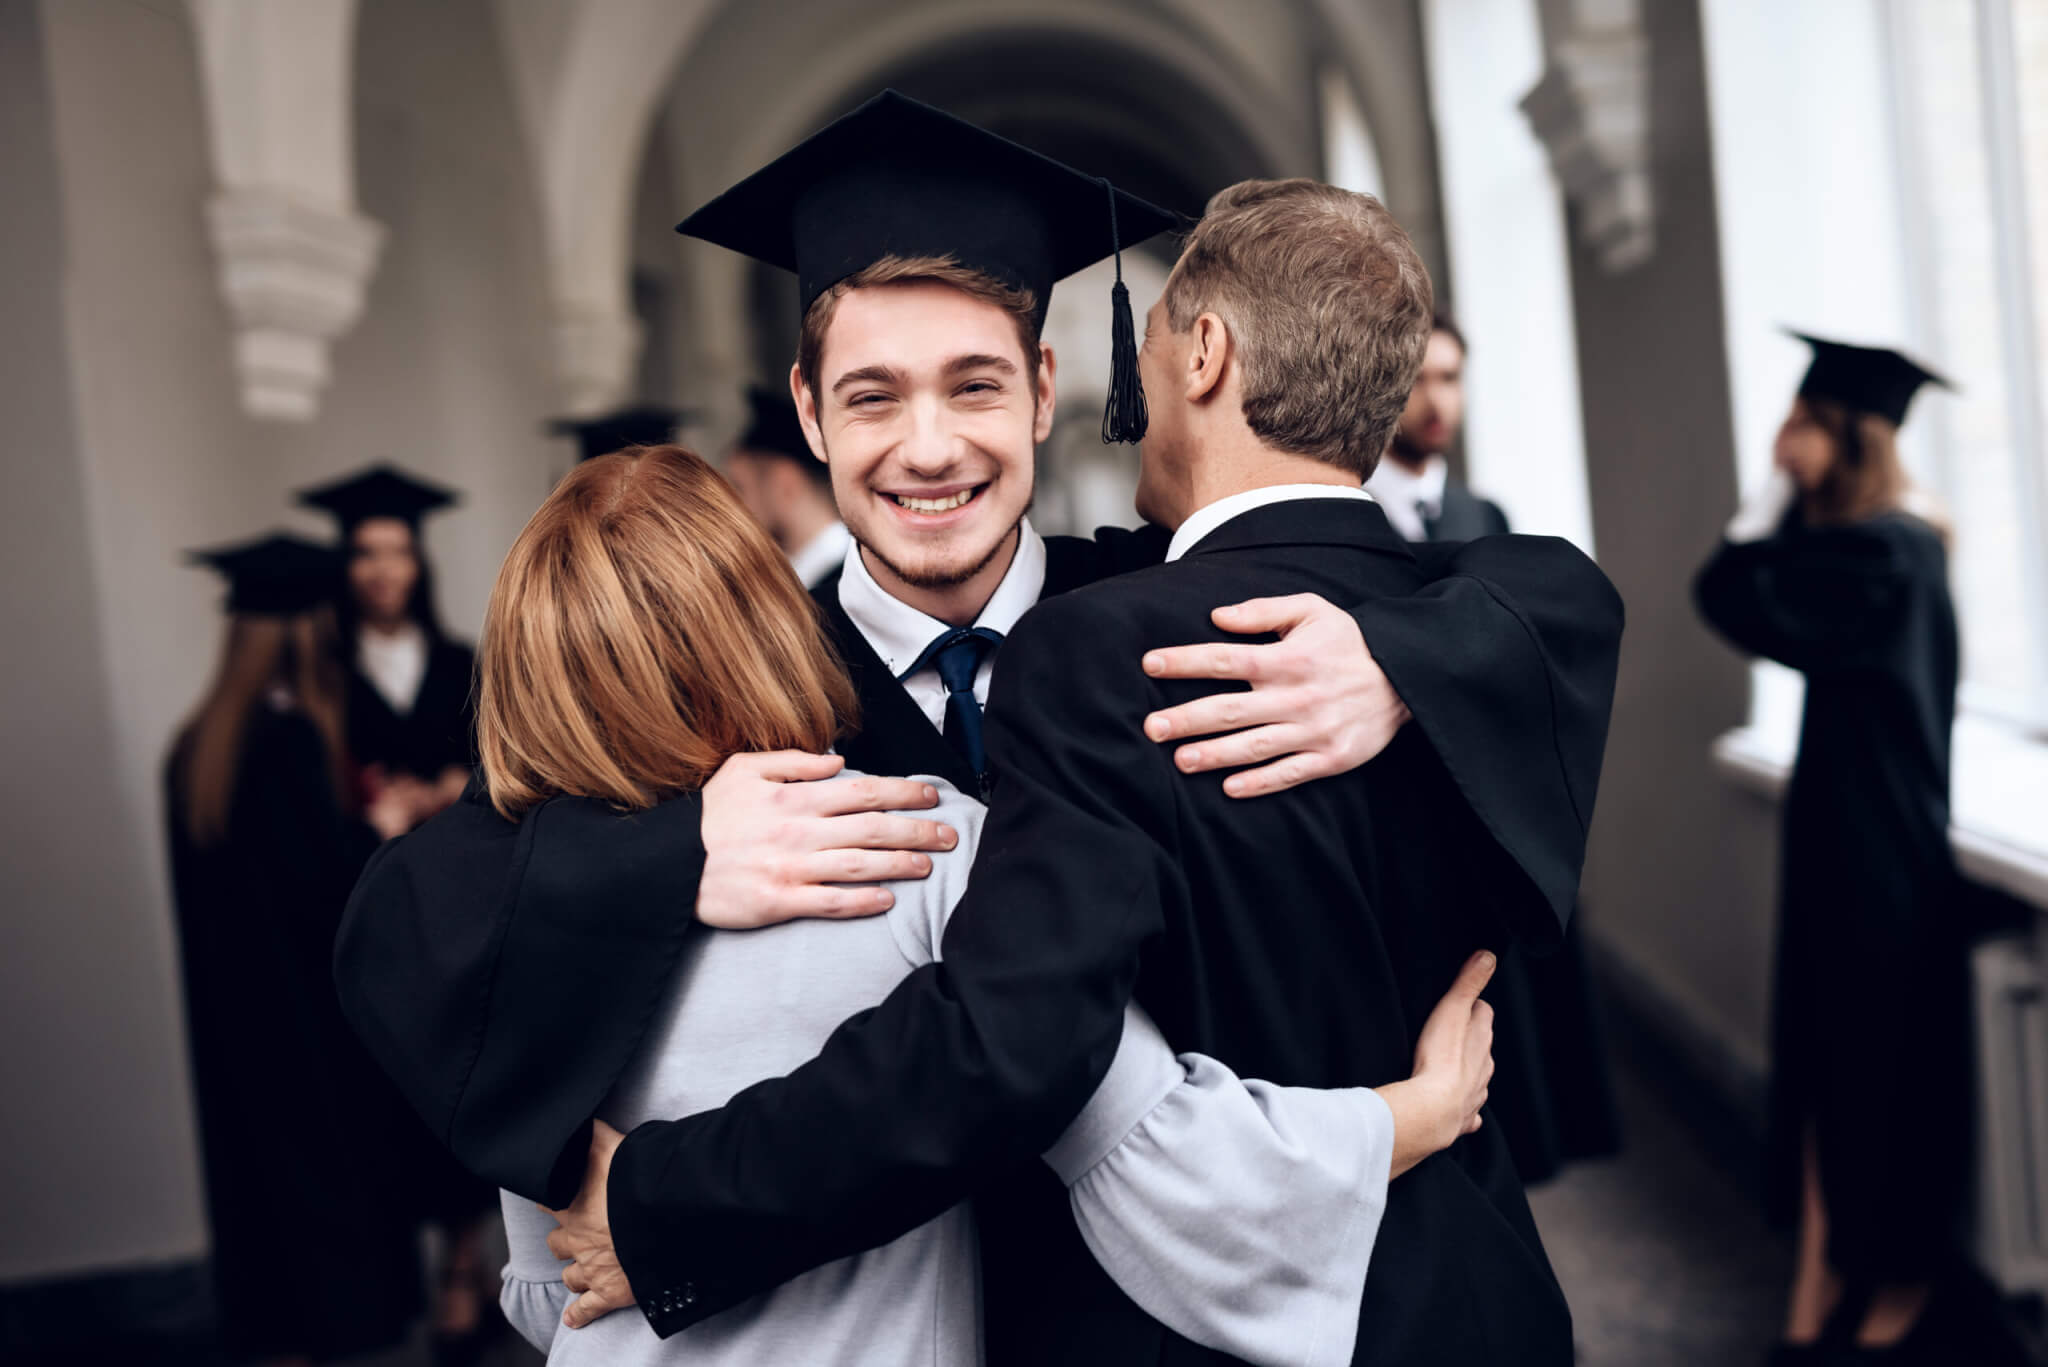 Graduate staying connected with family